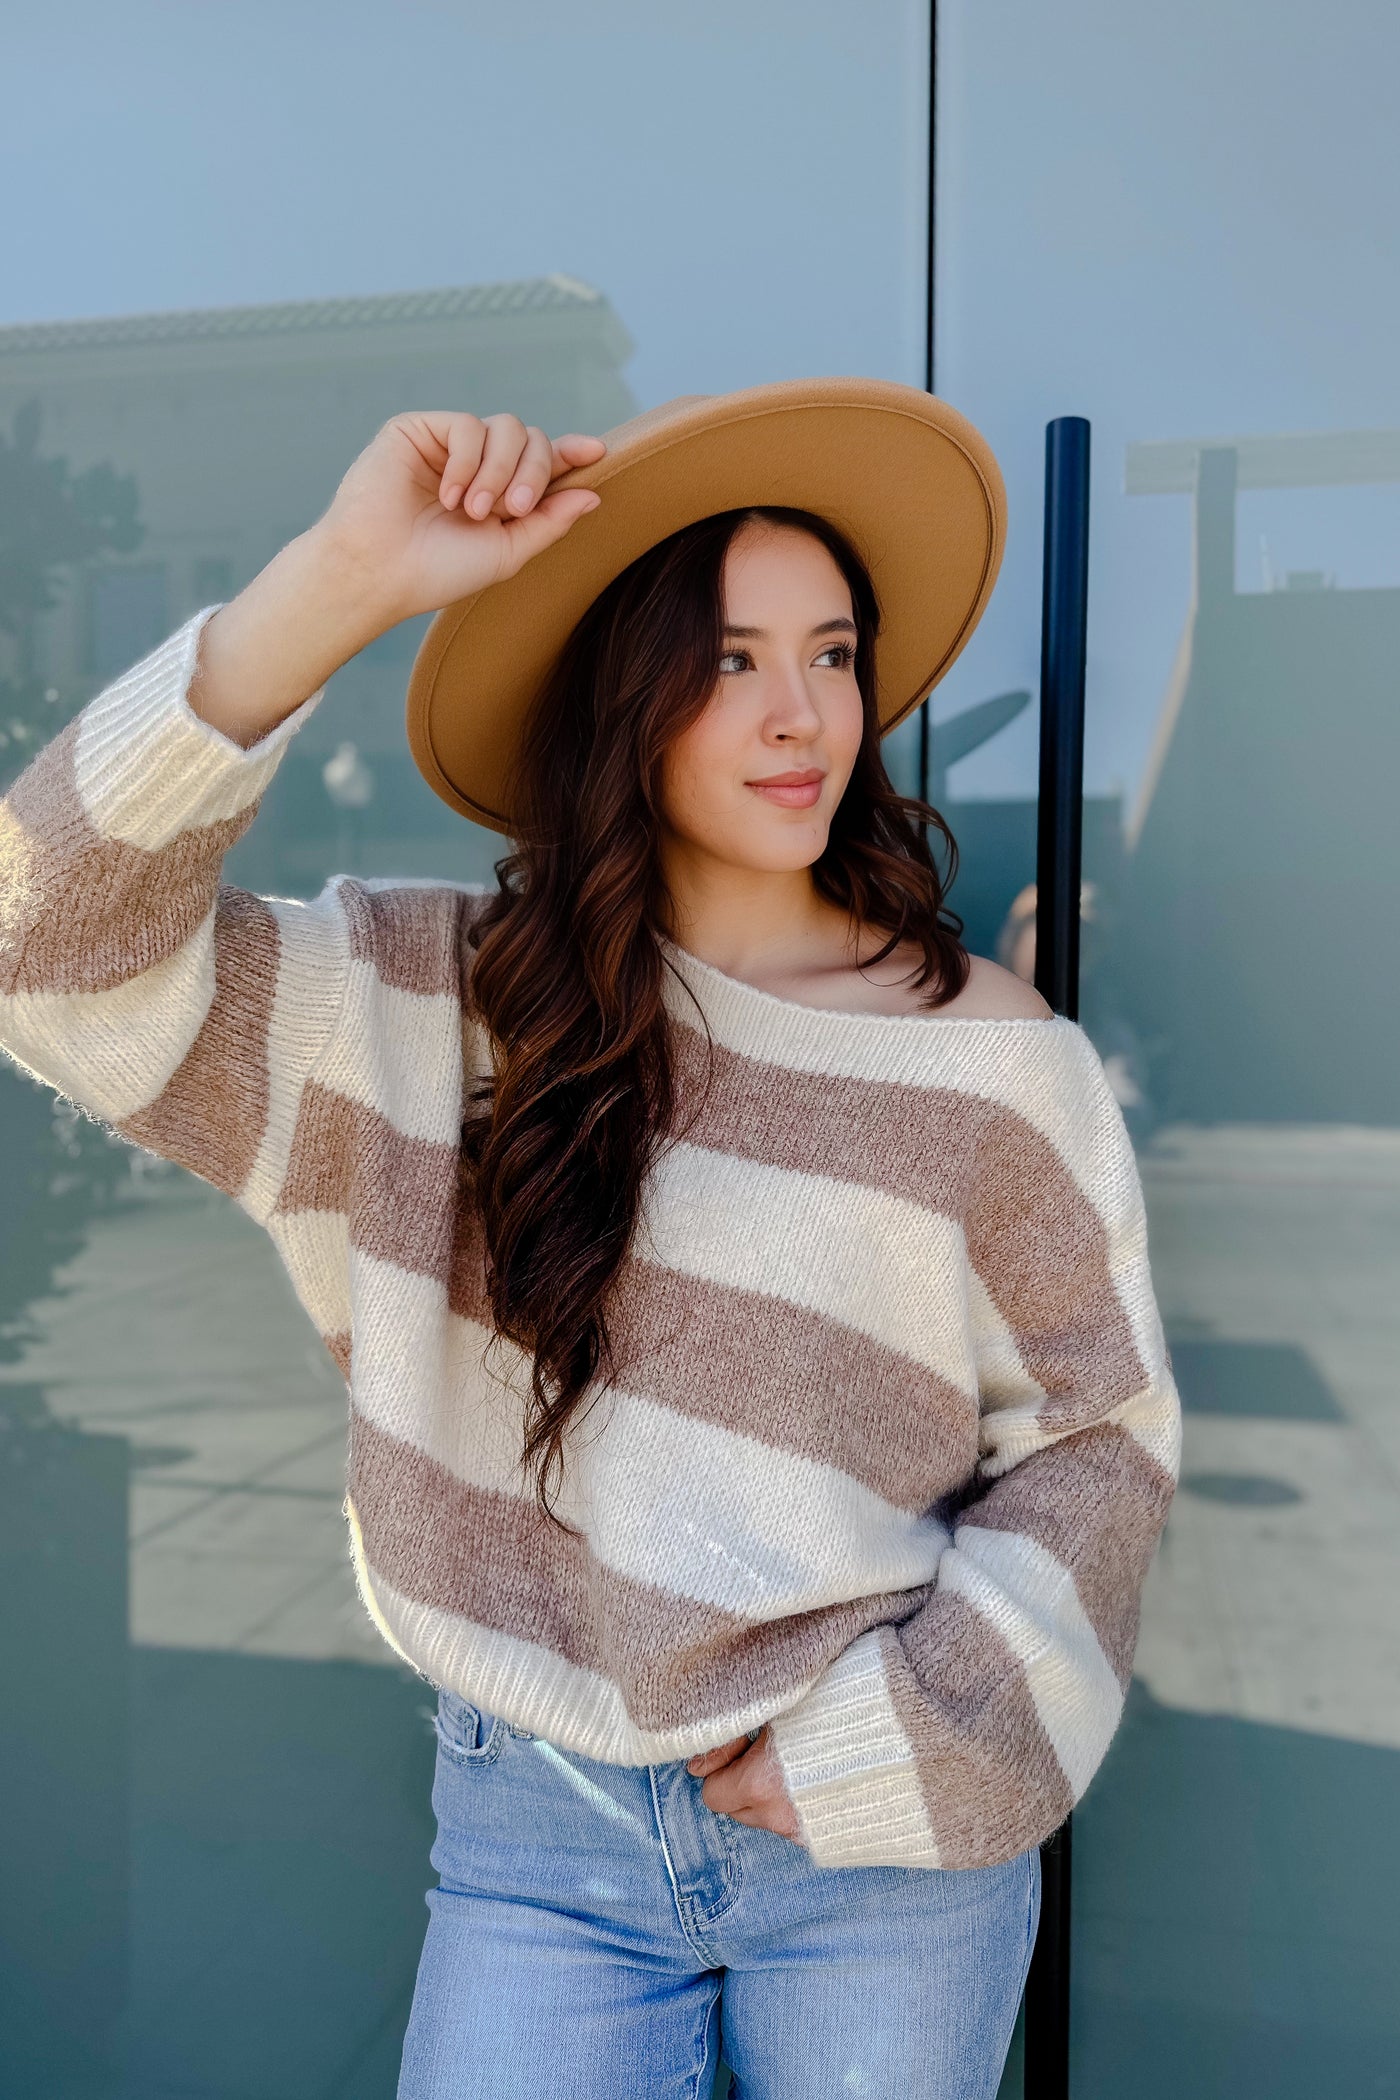 The Earn Your Stripes Cocoa and Ivory Sweater